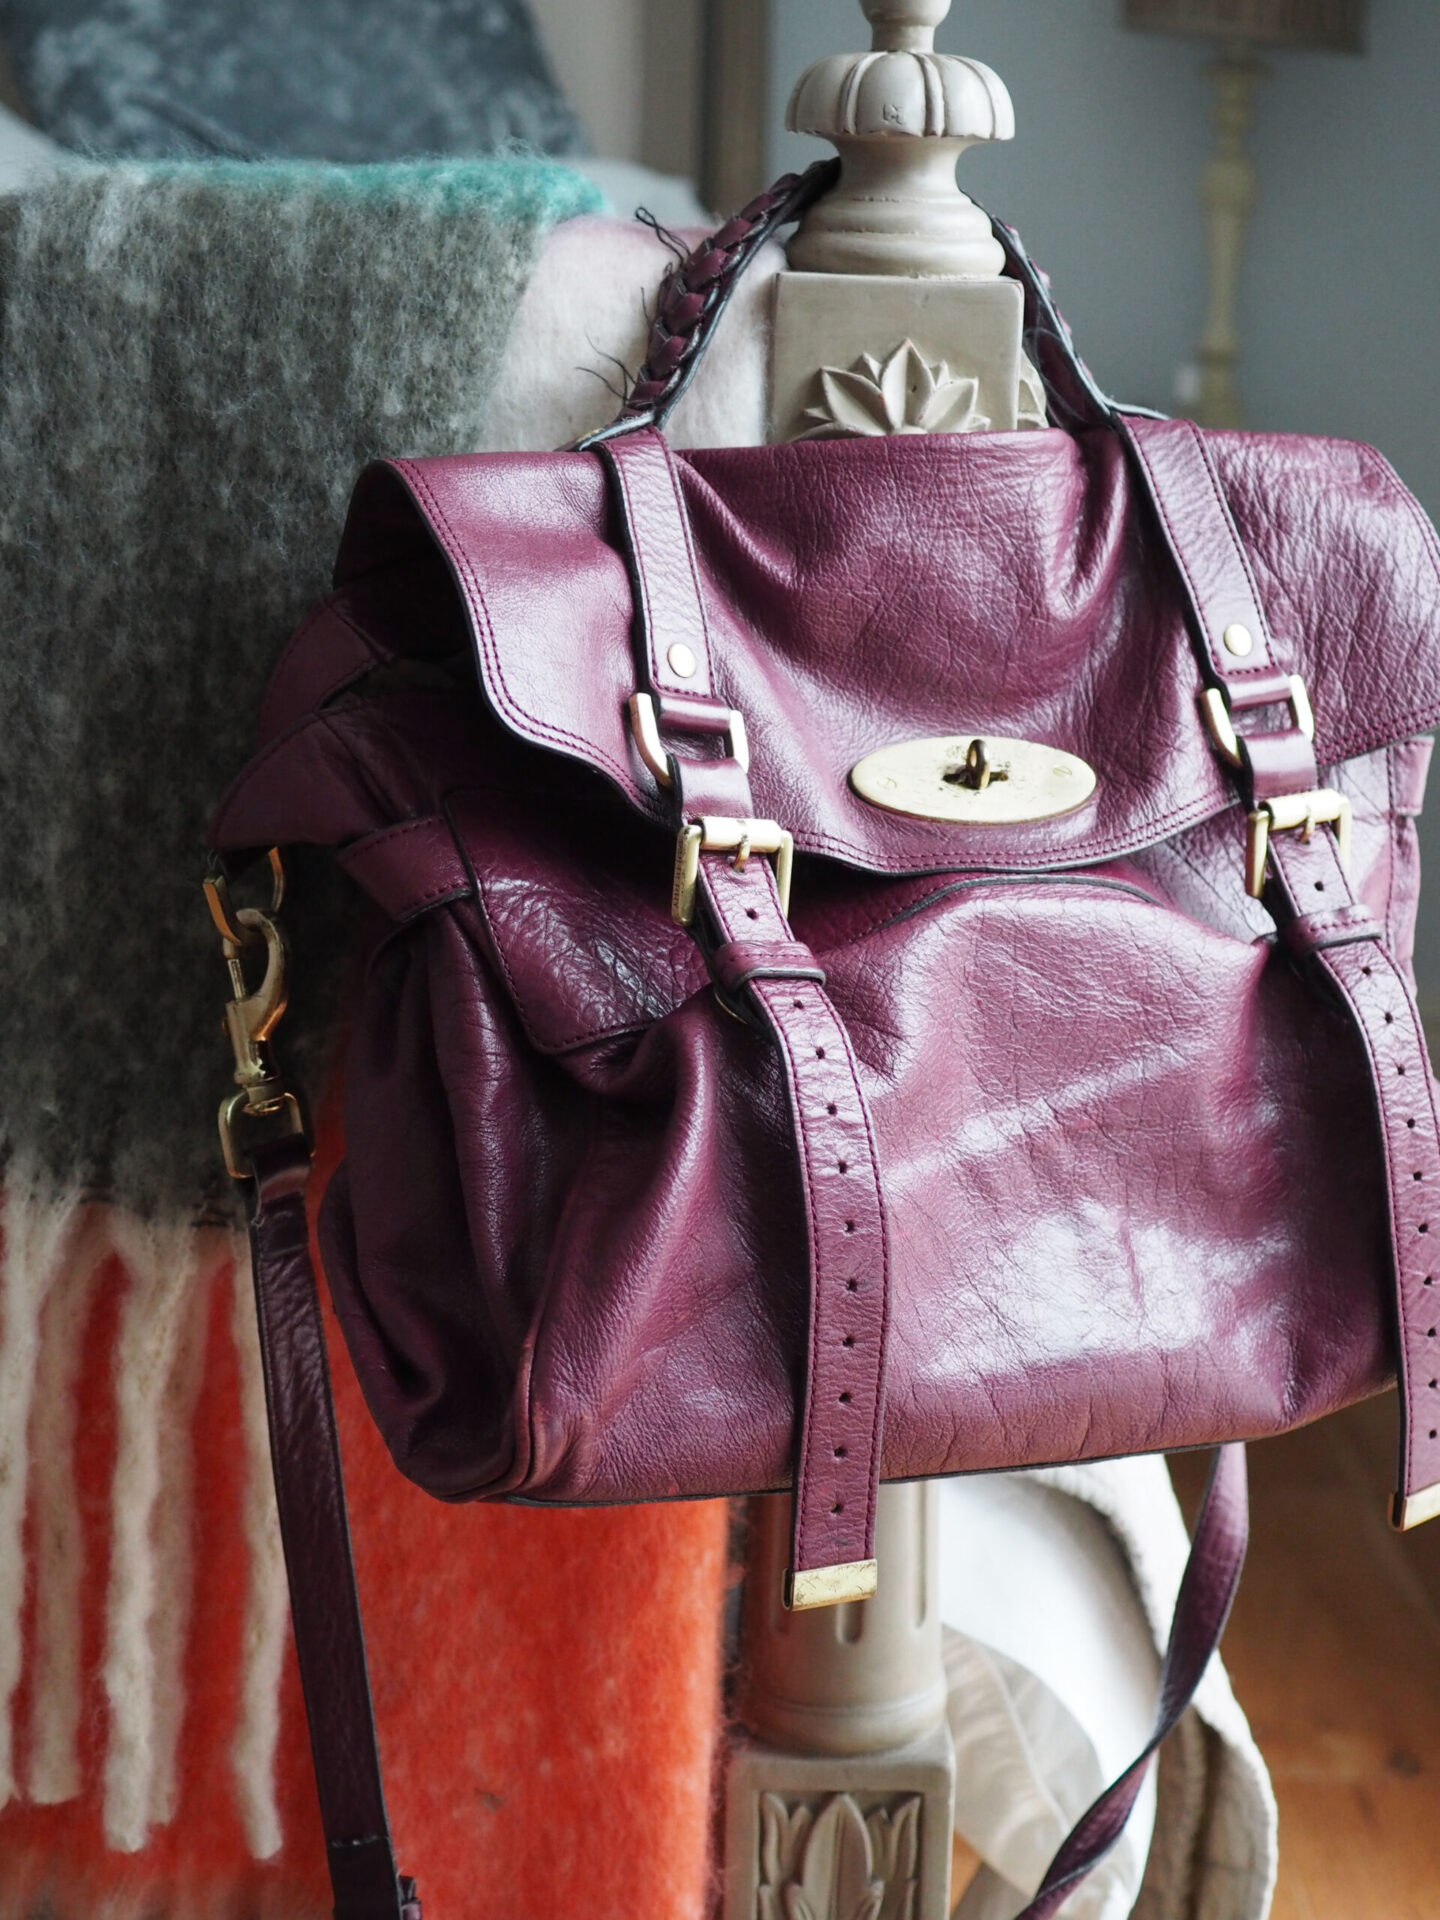 The Mulberry Antony Bag Review : My most-used handbag ever! - Laura Louise  Makeup + Beauty